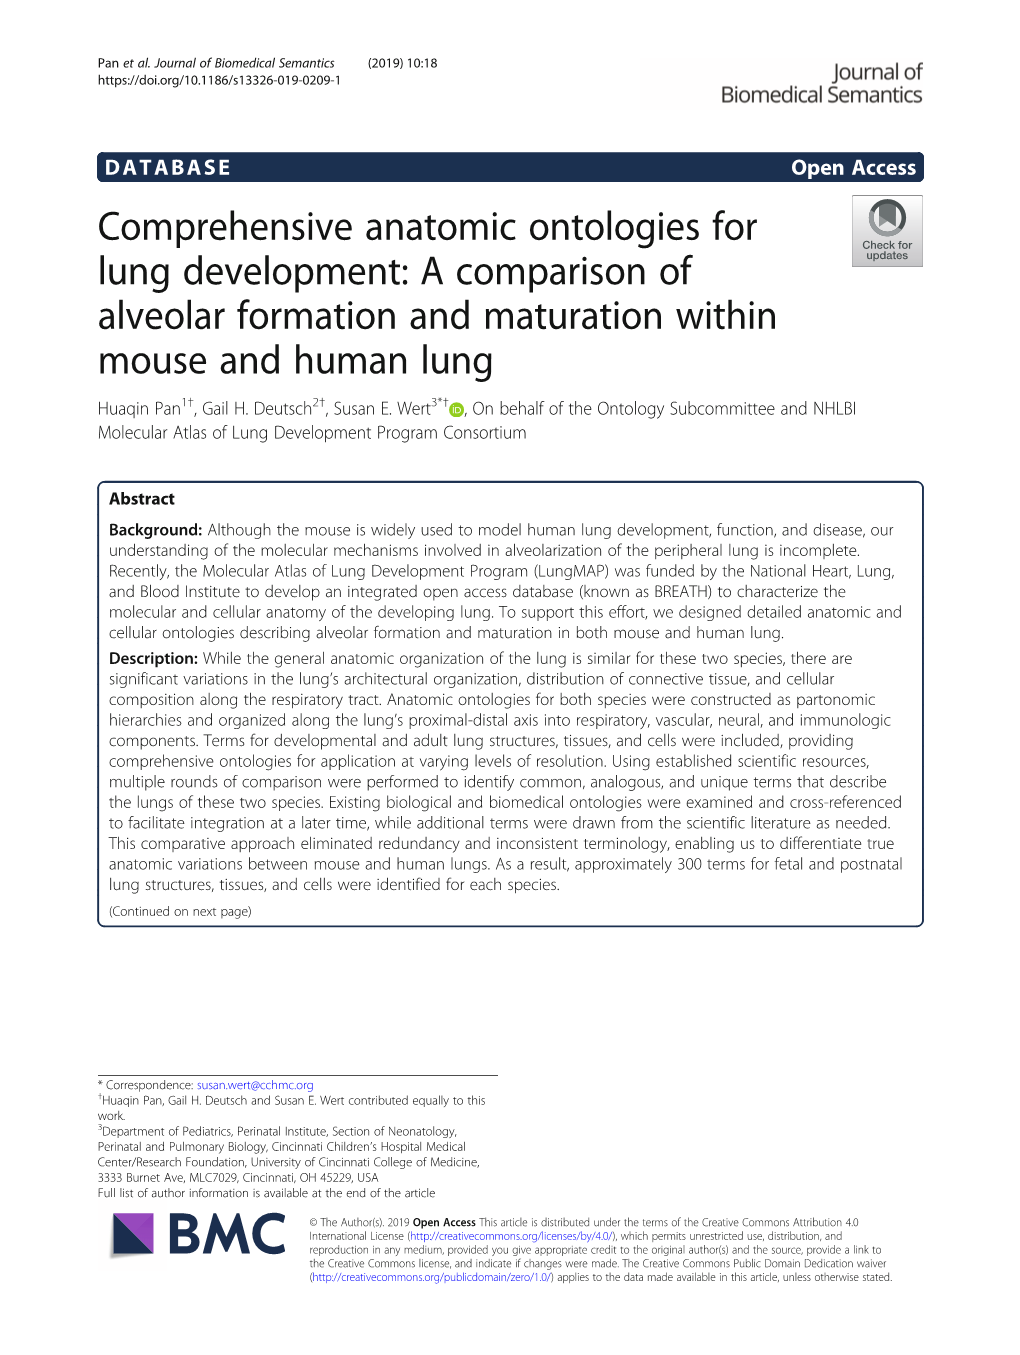 Comprehensive Anatomic Ontologies for Lung Development: a Comparison of Alveolar Formation and Maturation Within Mouse and Human Lung Huaqin Pan1†, Gail H